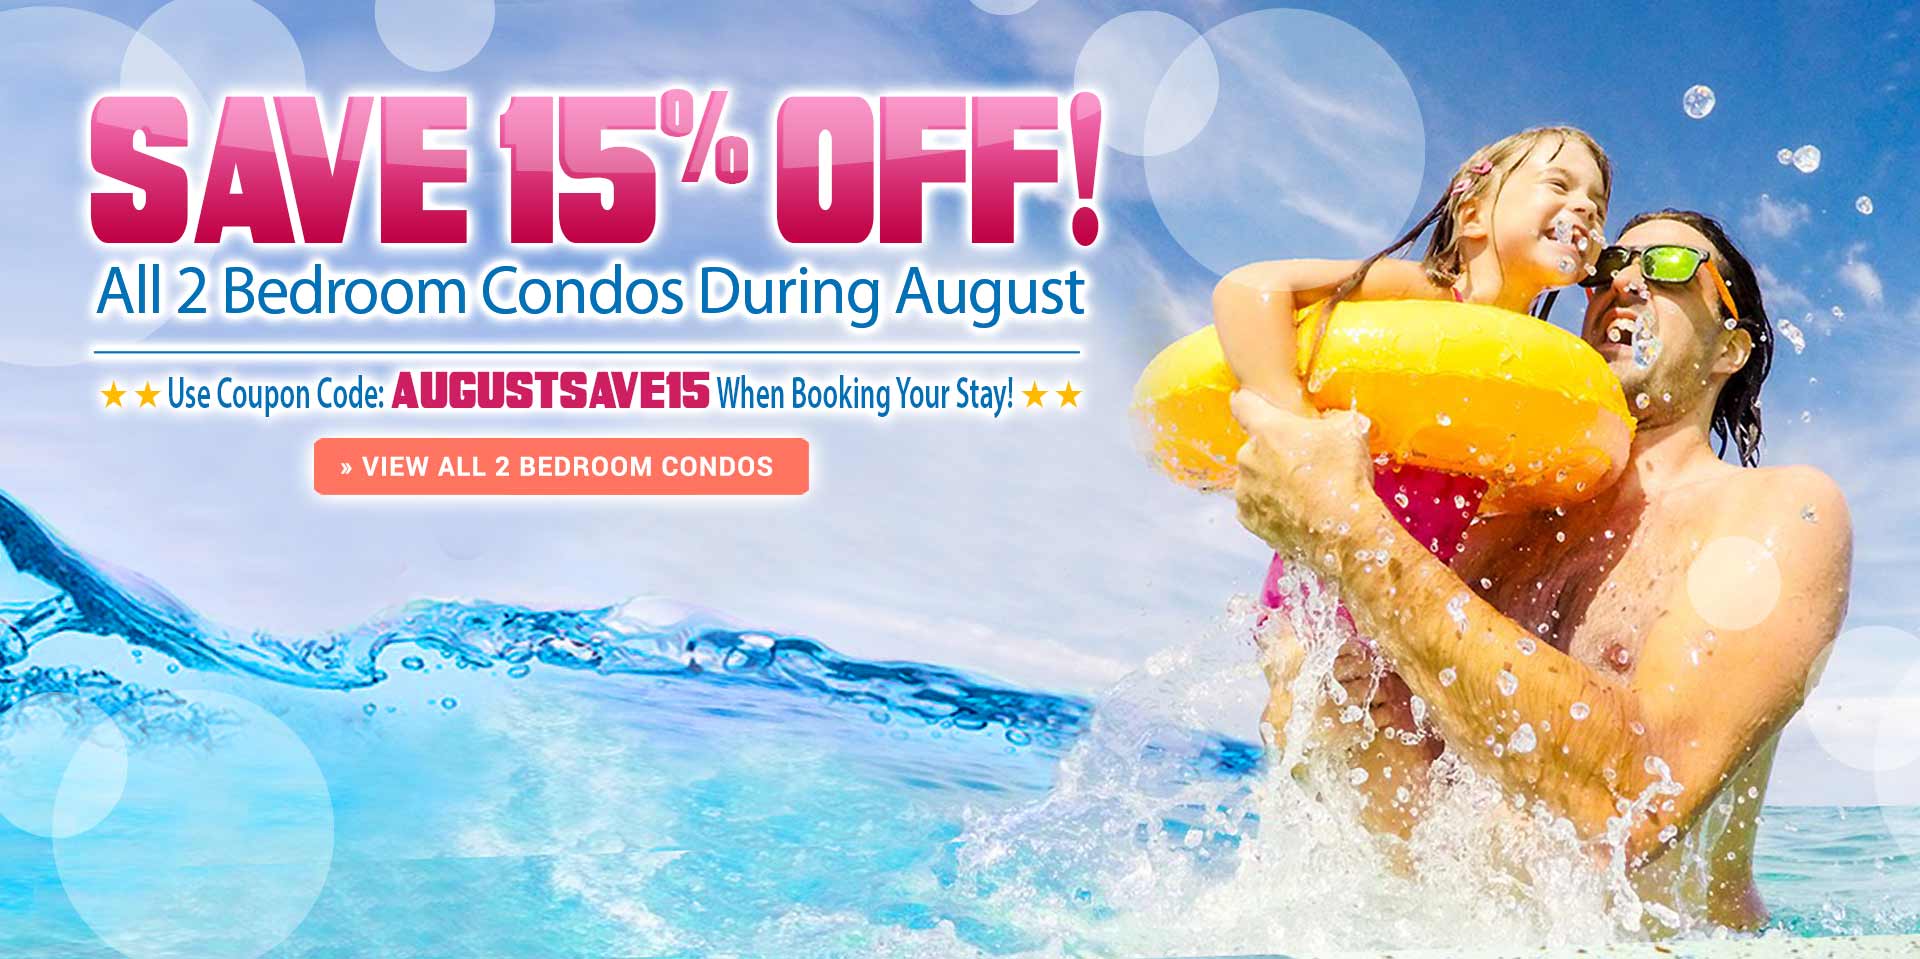 Stay in August and Save15% on 2 Bedrooms Condos